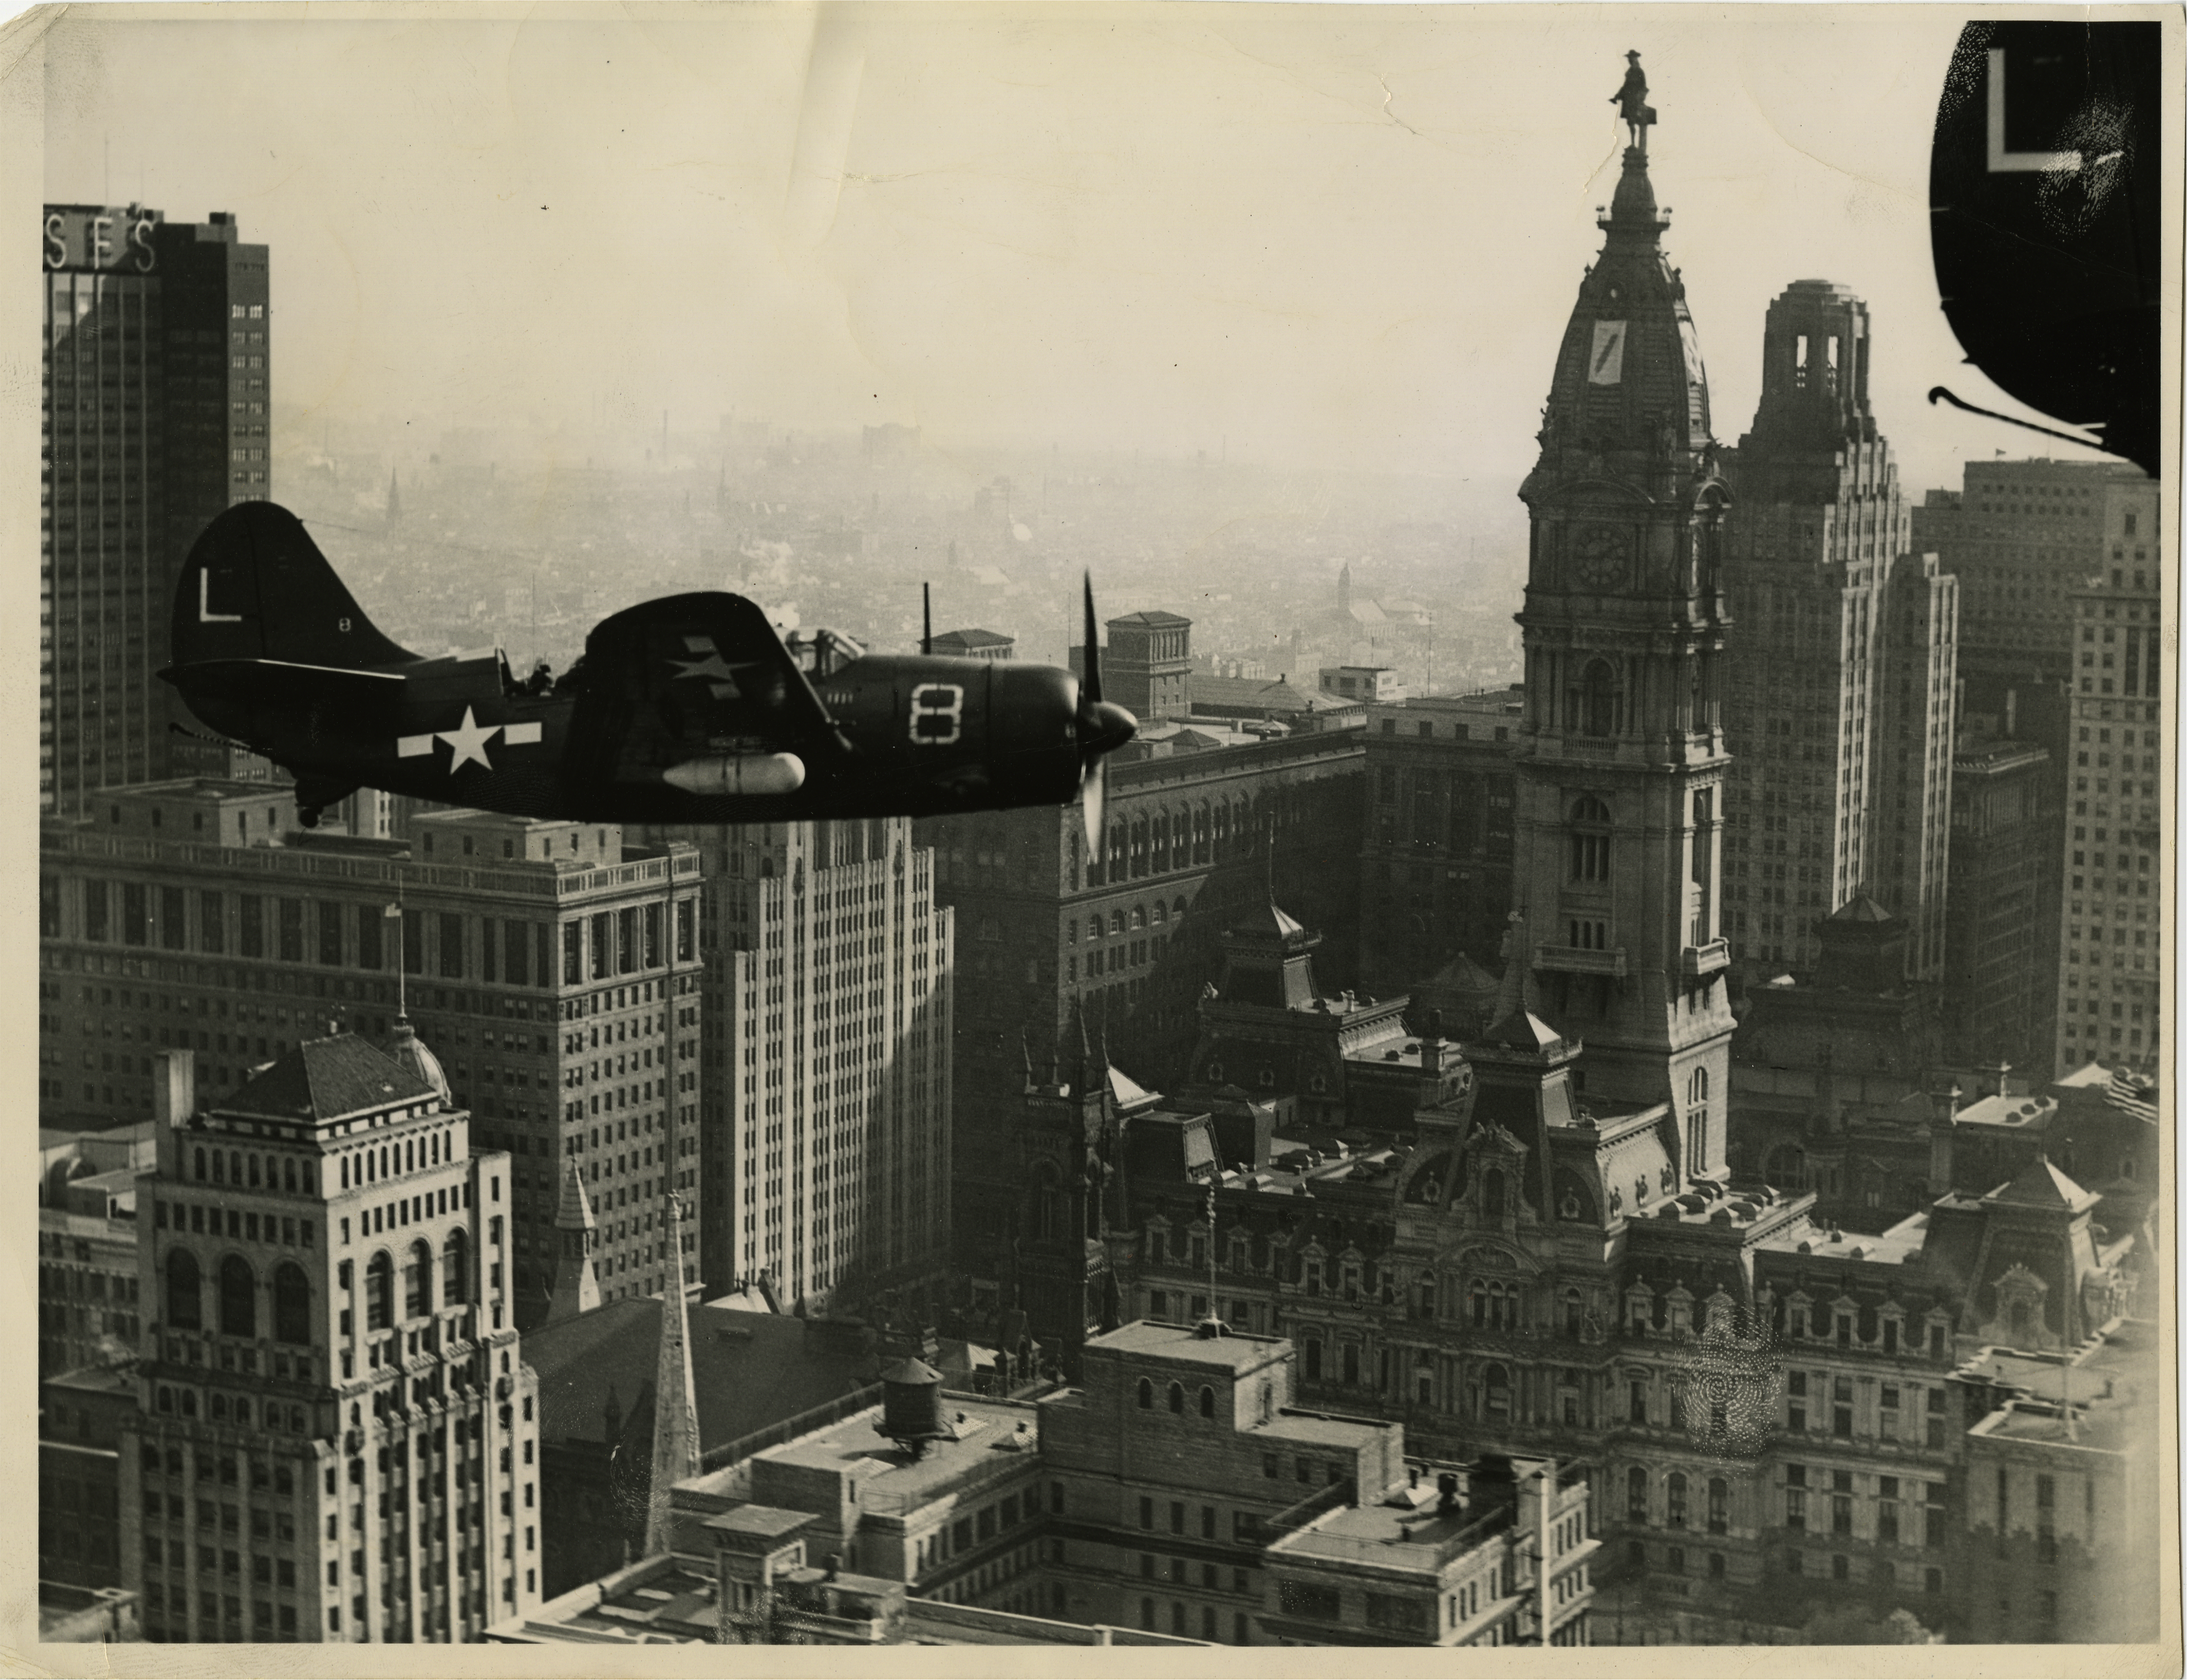 Planes fly in front of City Hall Record Number: 3181Collection: Philadelphia Record Photograph Morgue [V07], Folder Number: FF 33.2248 Reproduction restrictions: Unknown Address: North Broad Street, Philadelphia, PA 19107, USA Date of Original: 1945 Photograph depicts aerial view of Curtis SB2C Helldiver’s flying over Philadelphia in front of City Hall.